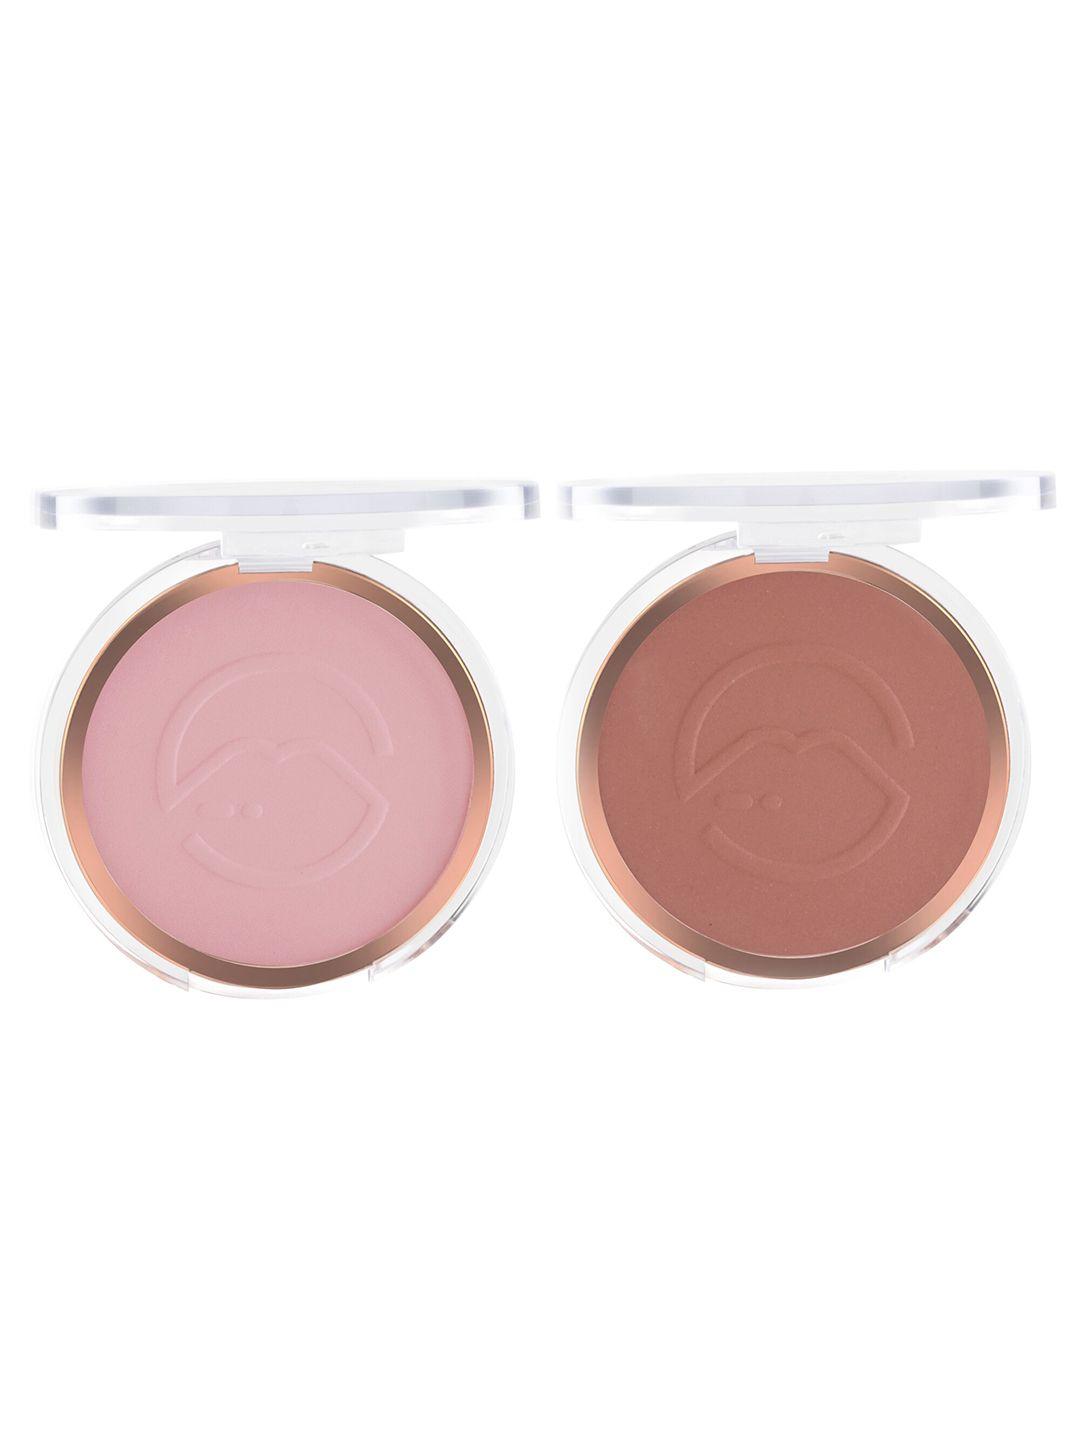 mars-set-of-2-flush-of-love-highly-pigmented-matte-face-blusher---shade-02-&-06